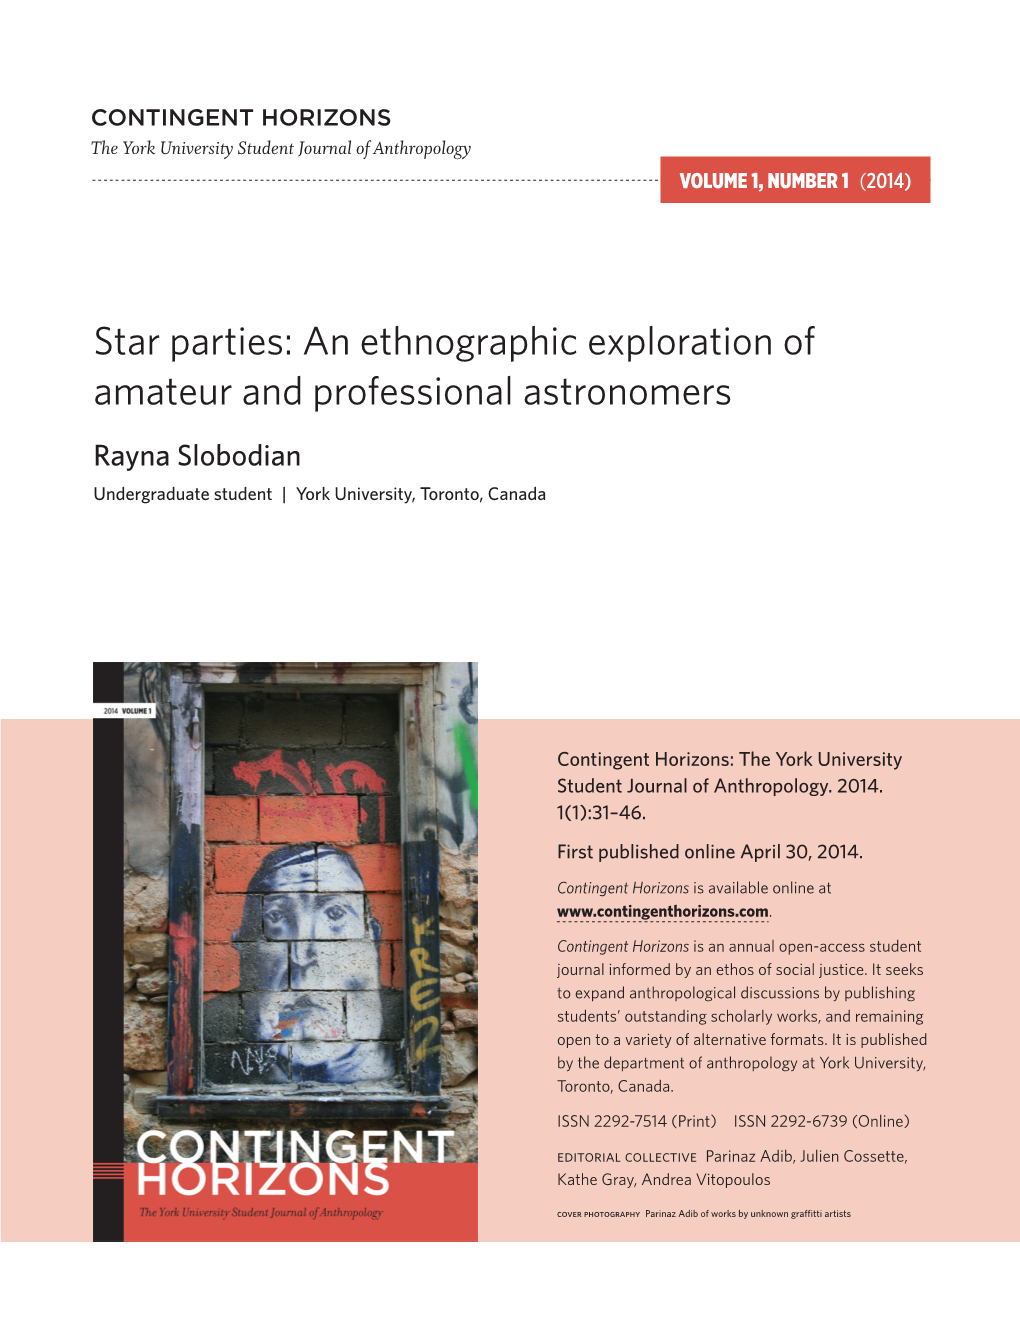 Star Parties: an Ethnographic Exploration of Amateur and Professional Astronomers Rayna Slobodian Undergraduate Student | York University, Toronto, Canada